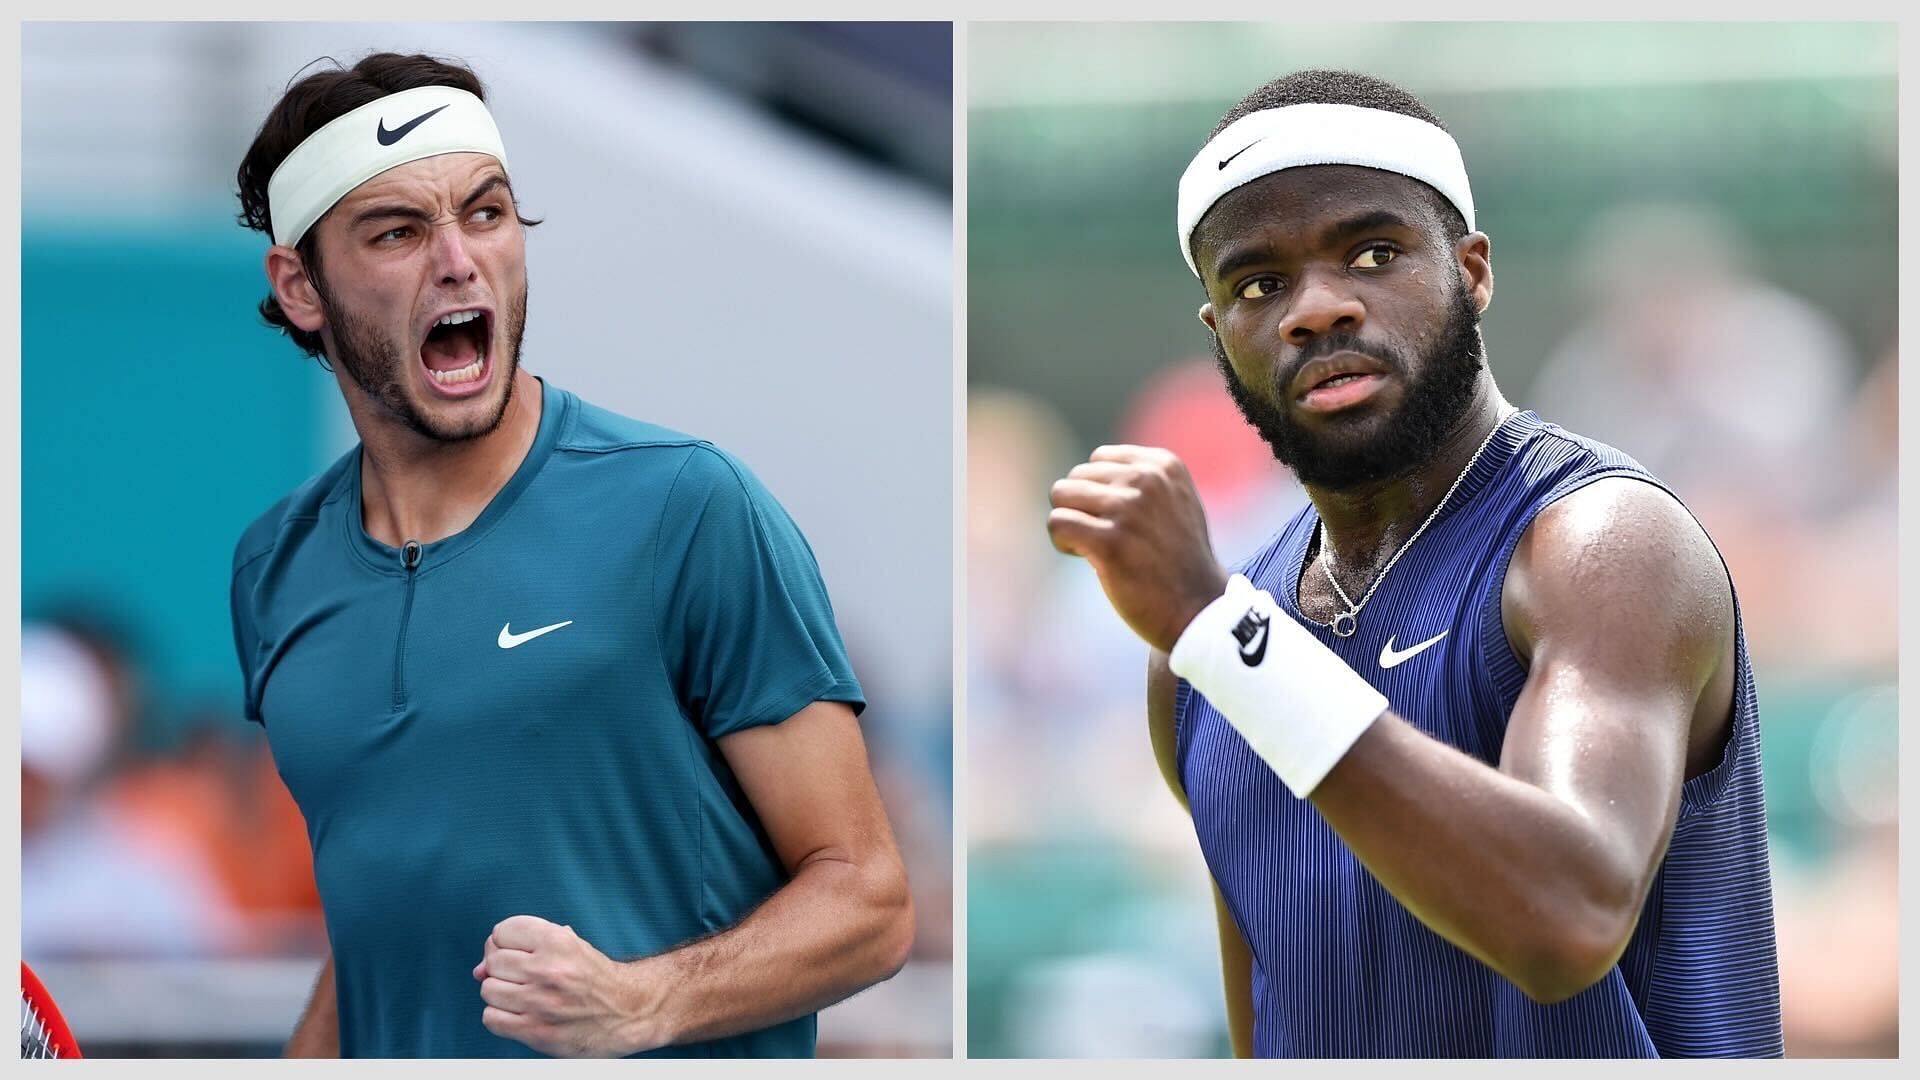 USA dominates year-end ATP rankings as Taylor Fritz, Frances Tiafoe and eight others finish in Top 100